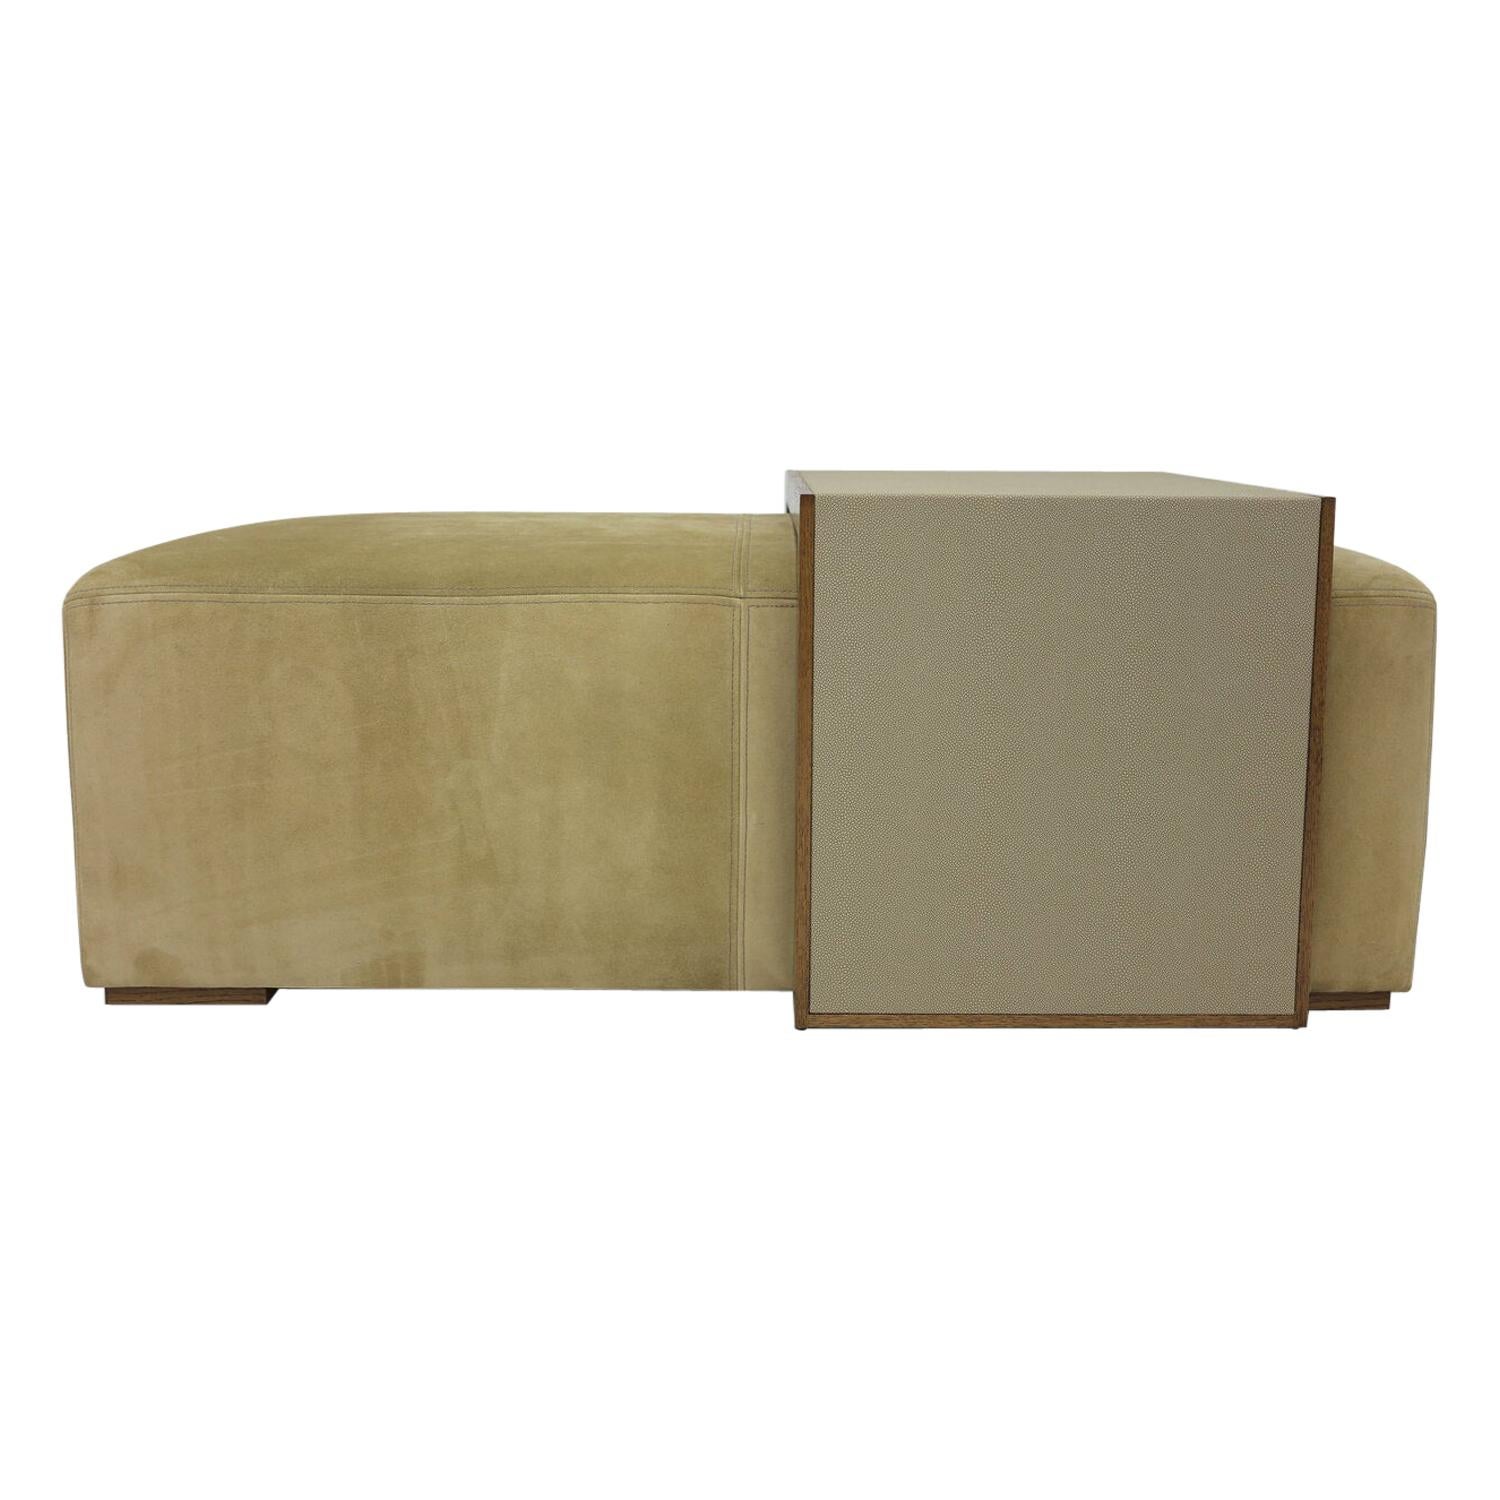 Custom Ottoman and Wood Table Shown in Suede and Oak with Faux Shagrin For Sale